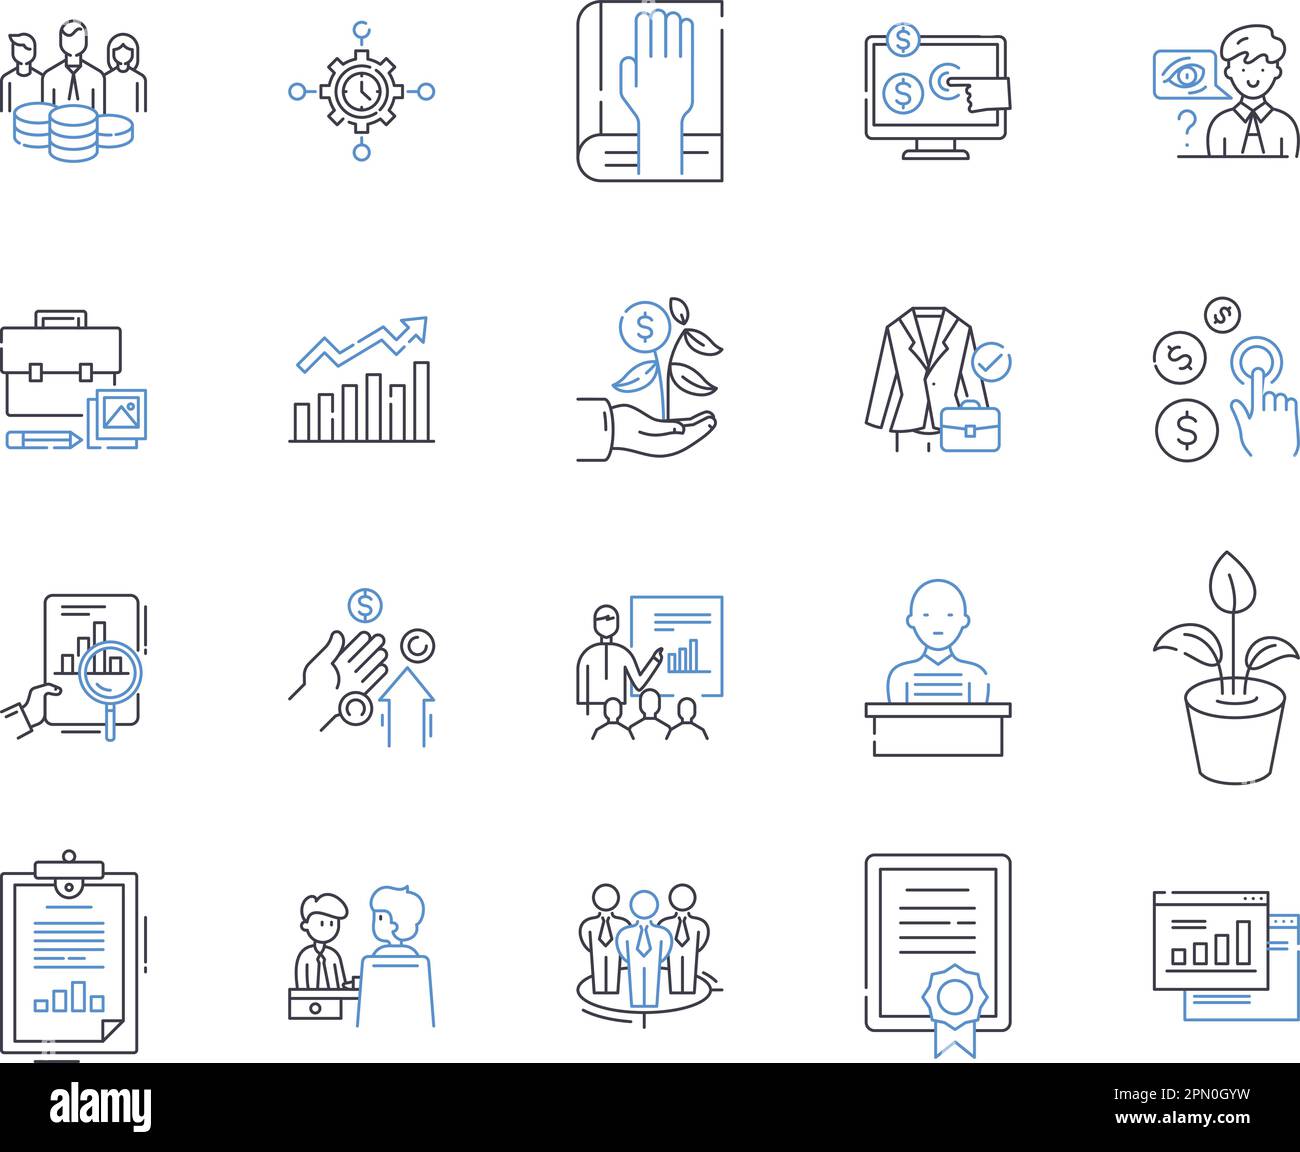 Accounting and documents outline icons collection. Accounting, Documents, Audit, Ledger, Payables, Receivables, Spreadsheet vector and illustration Stock Vector